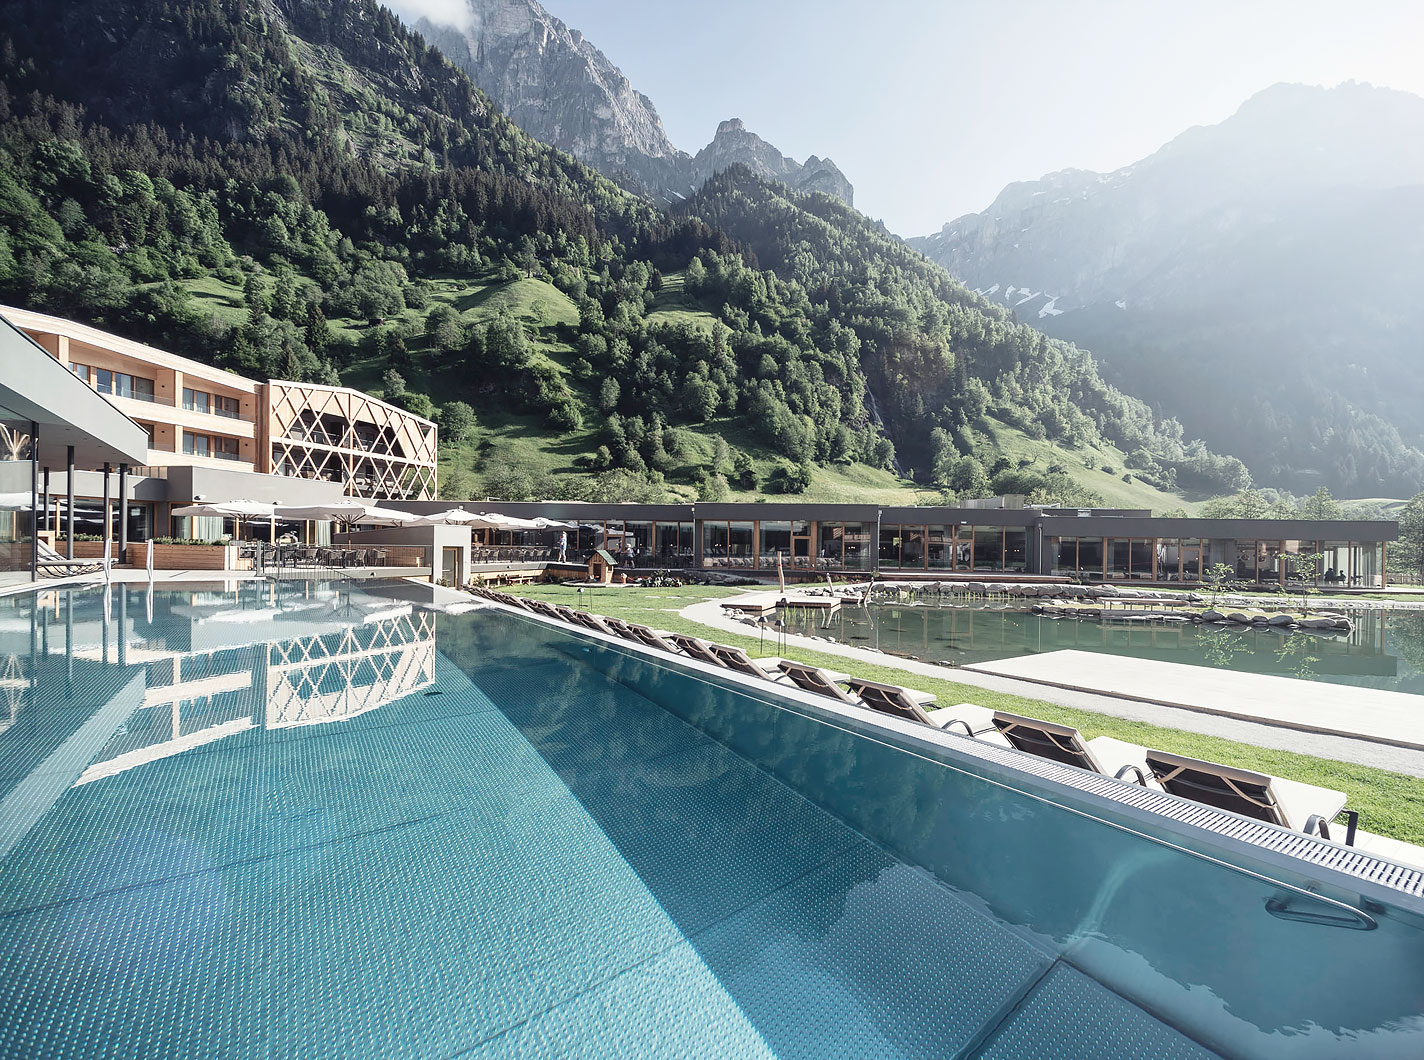 Pretty Hotels: The most beautiful hotels in South Tyrol (Image 21)